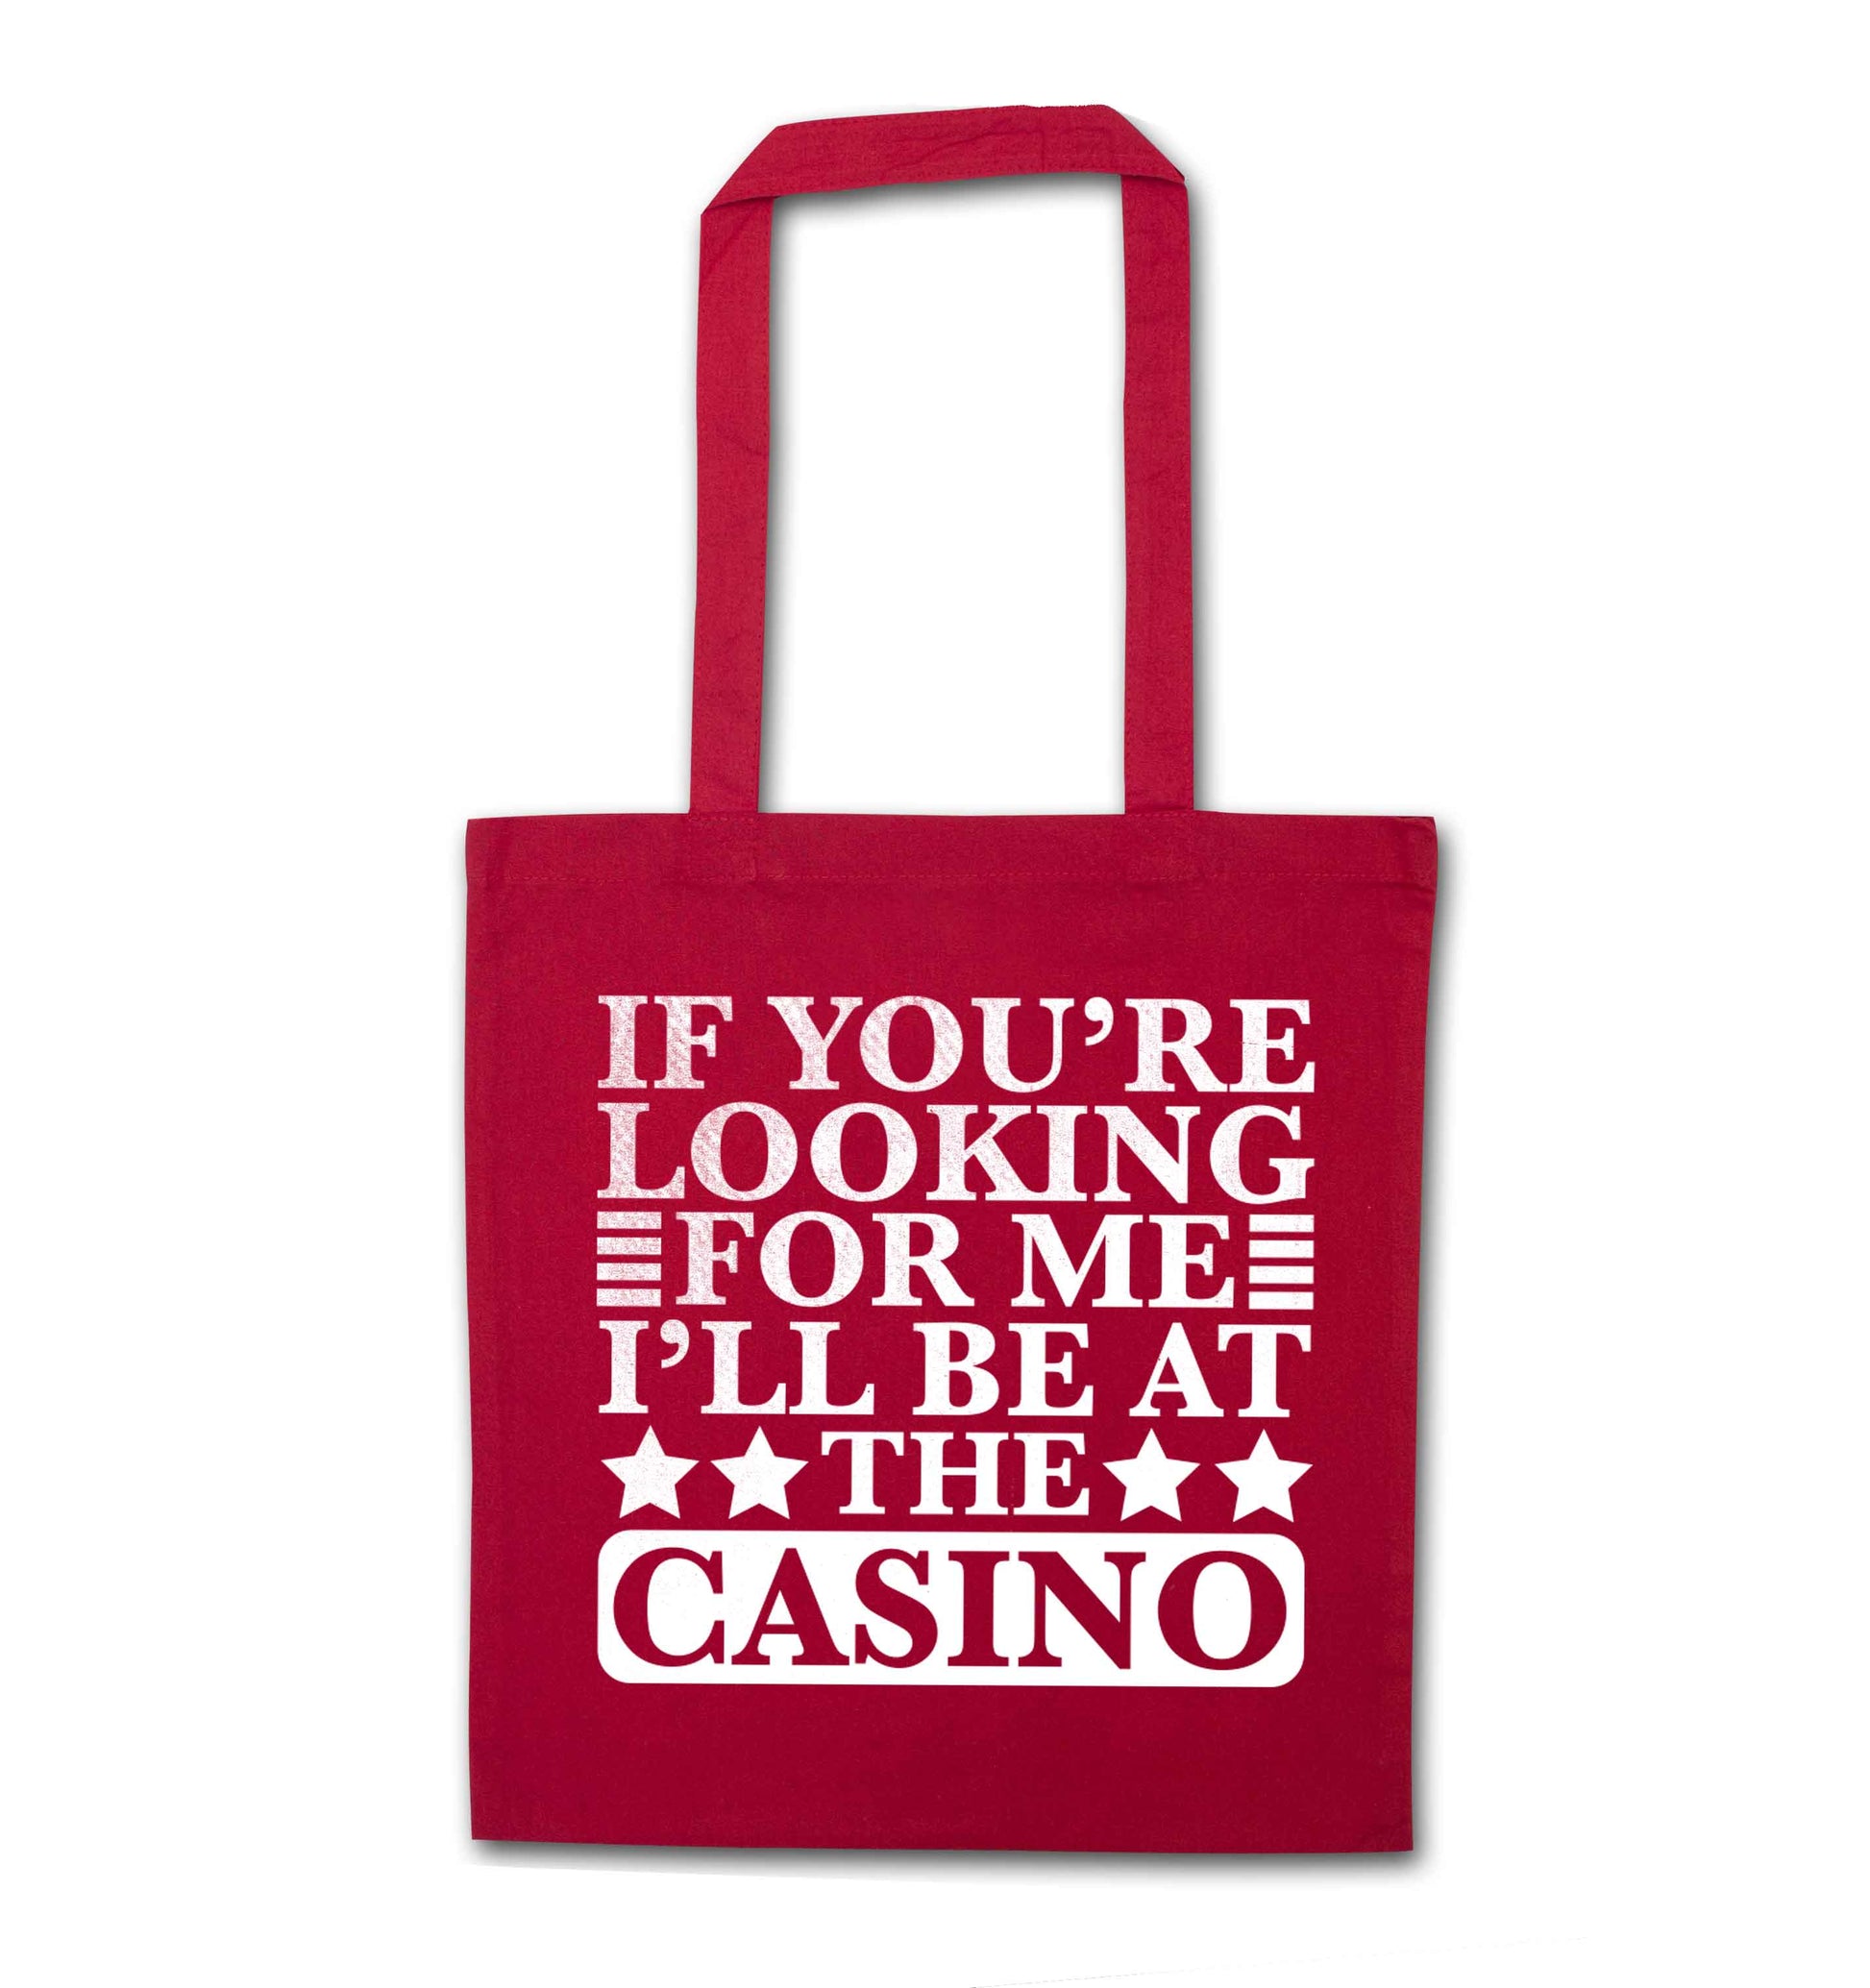 If you're looking for me I'll be at the casino red tote bag